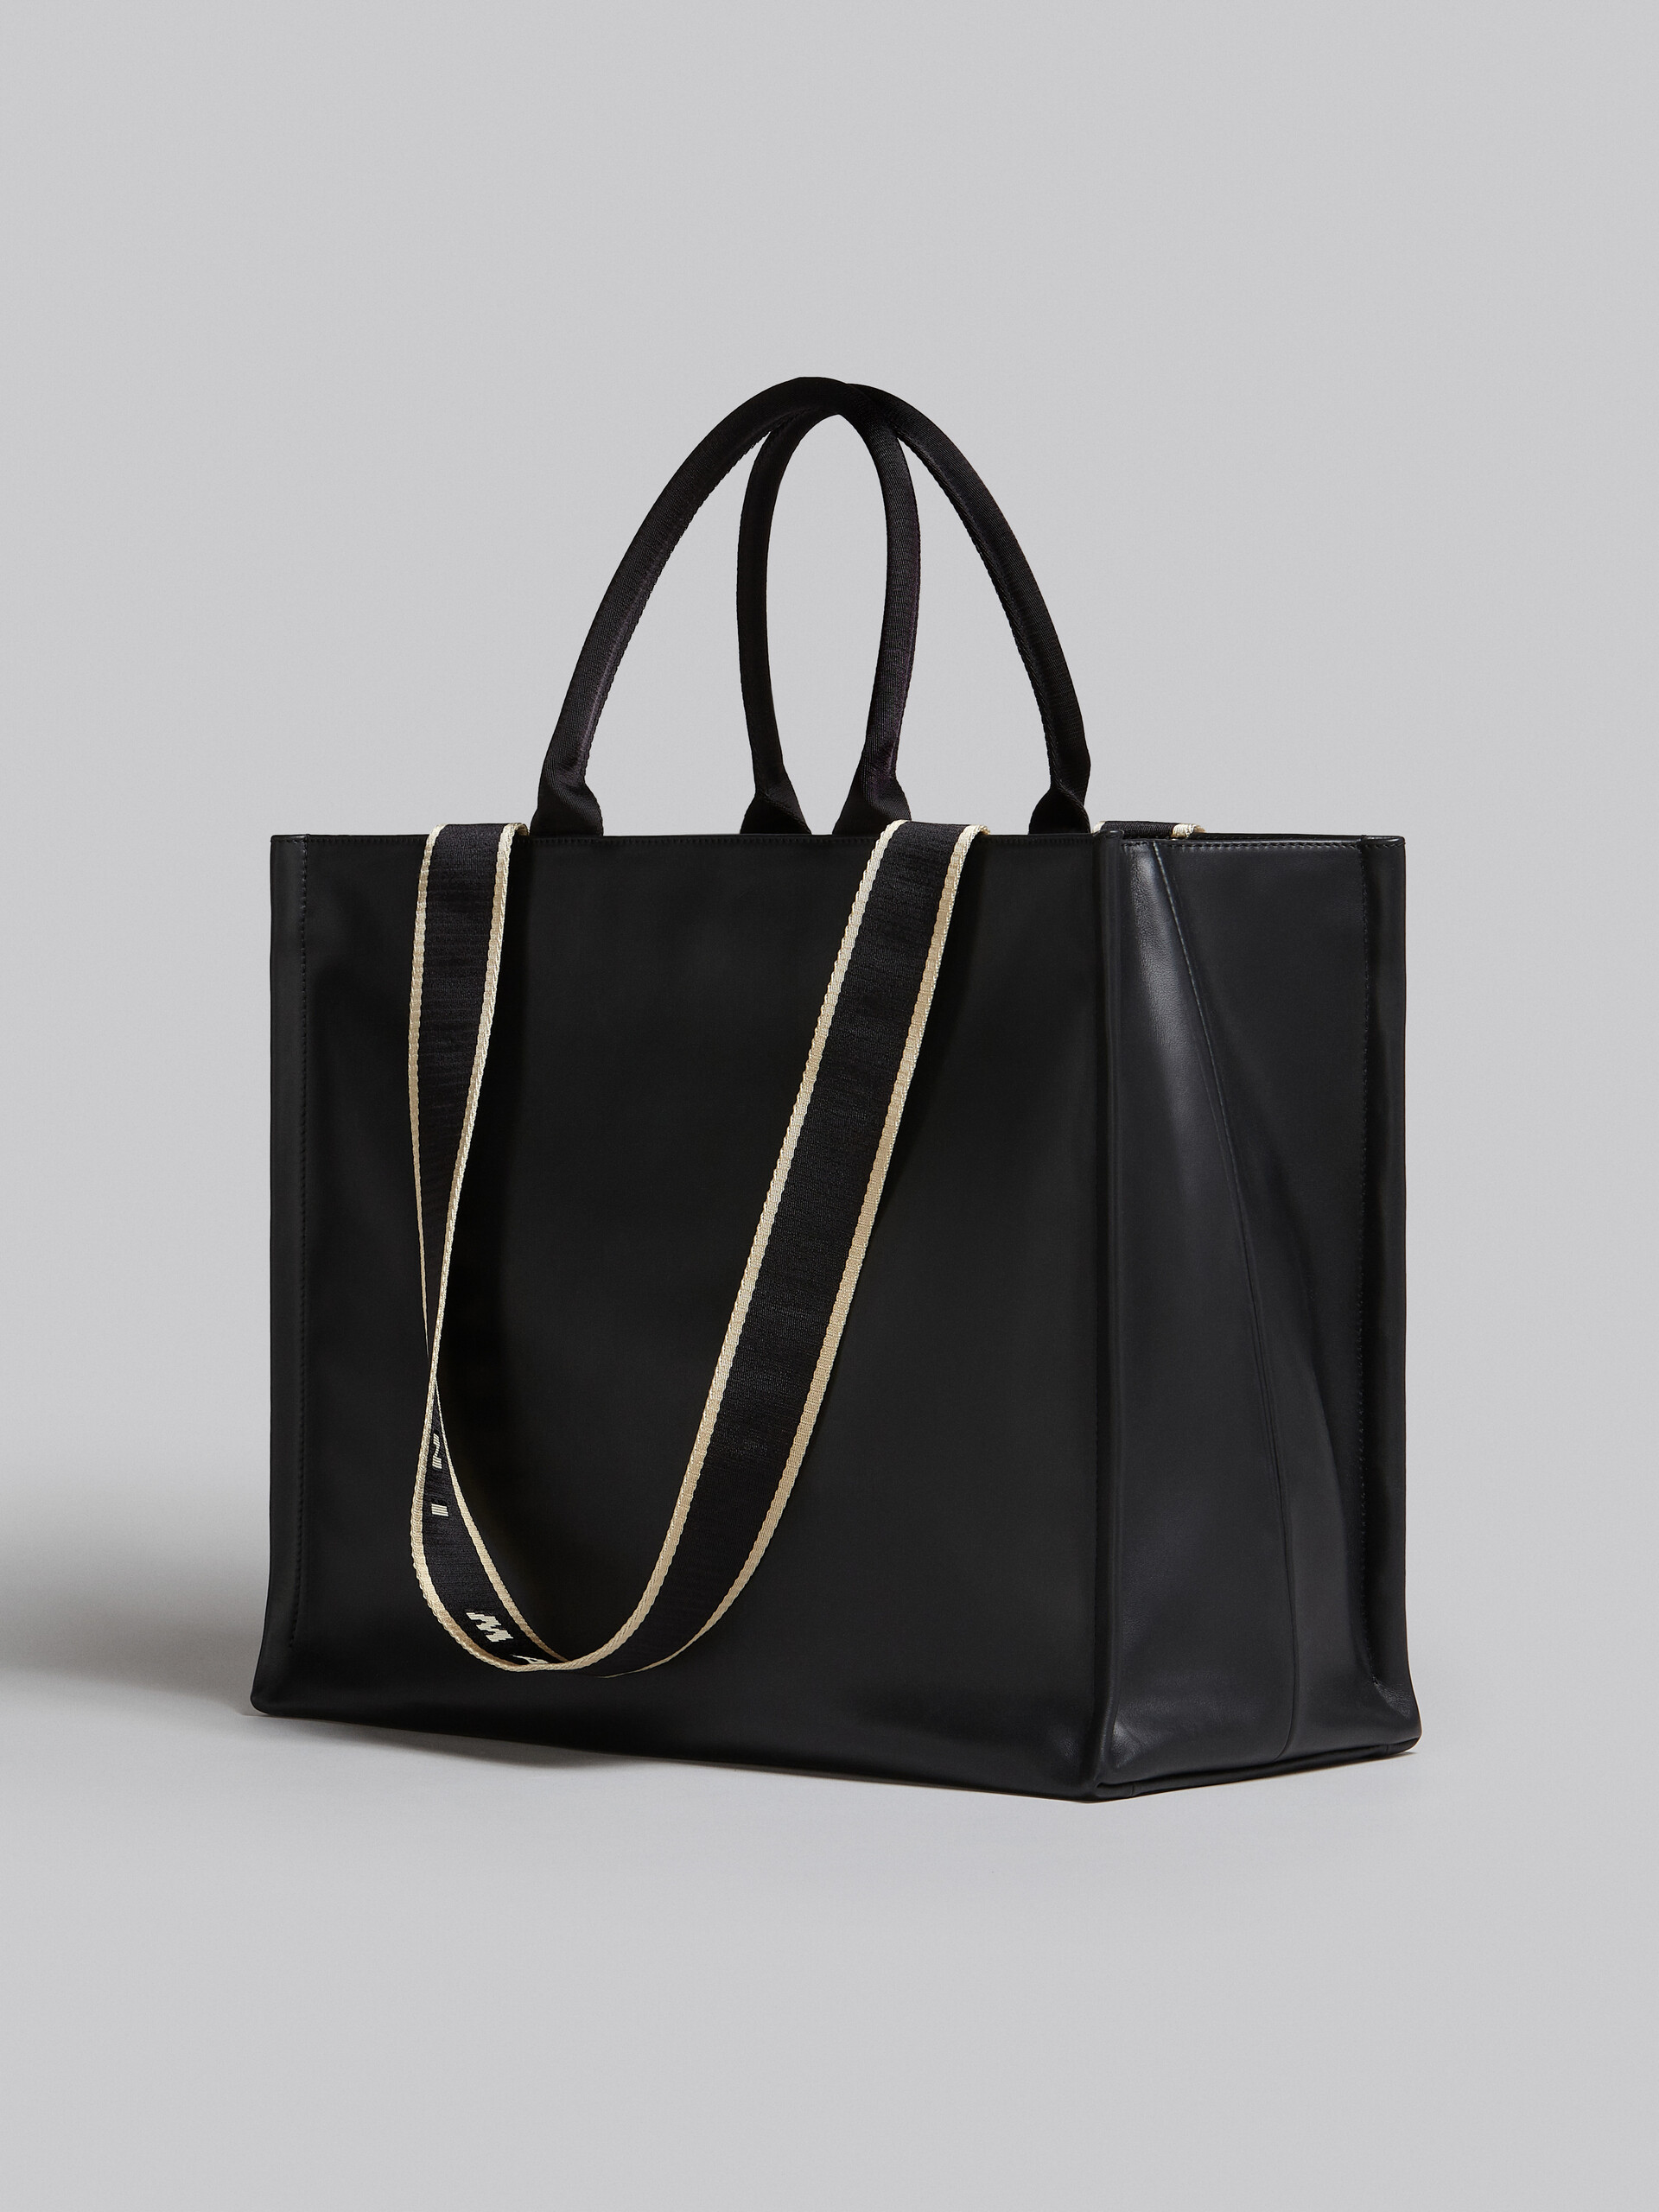 Bey Tote Bag in black leather - Shopping Bags - Image 2